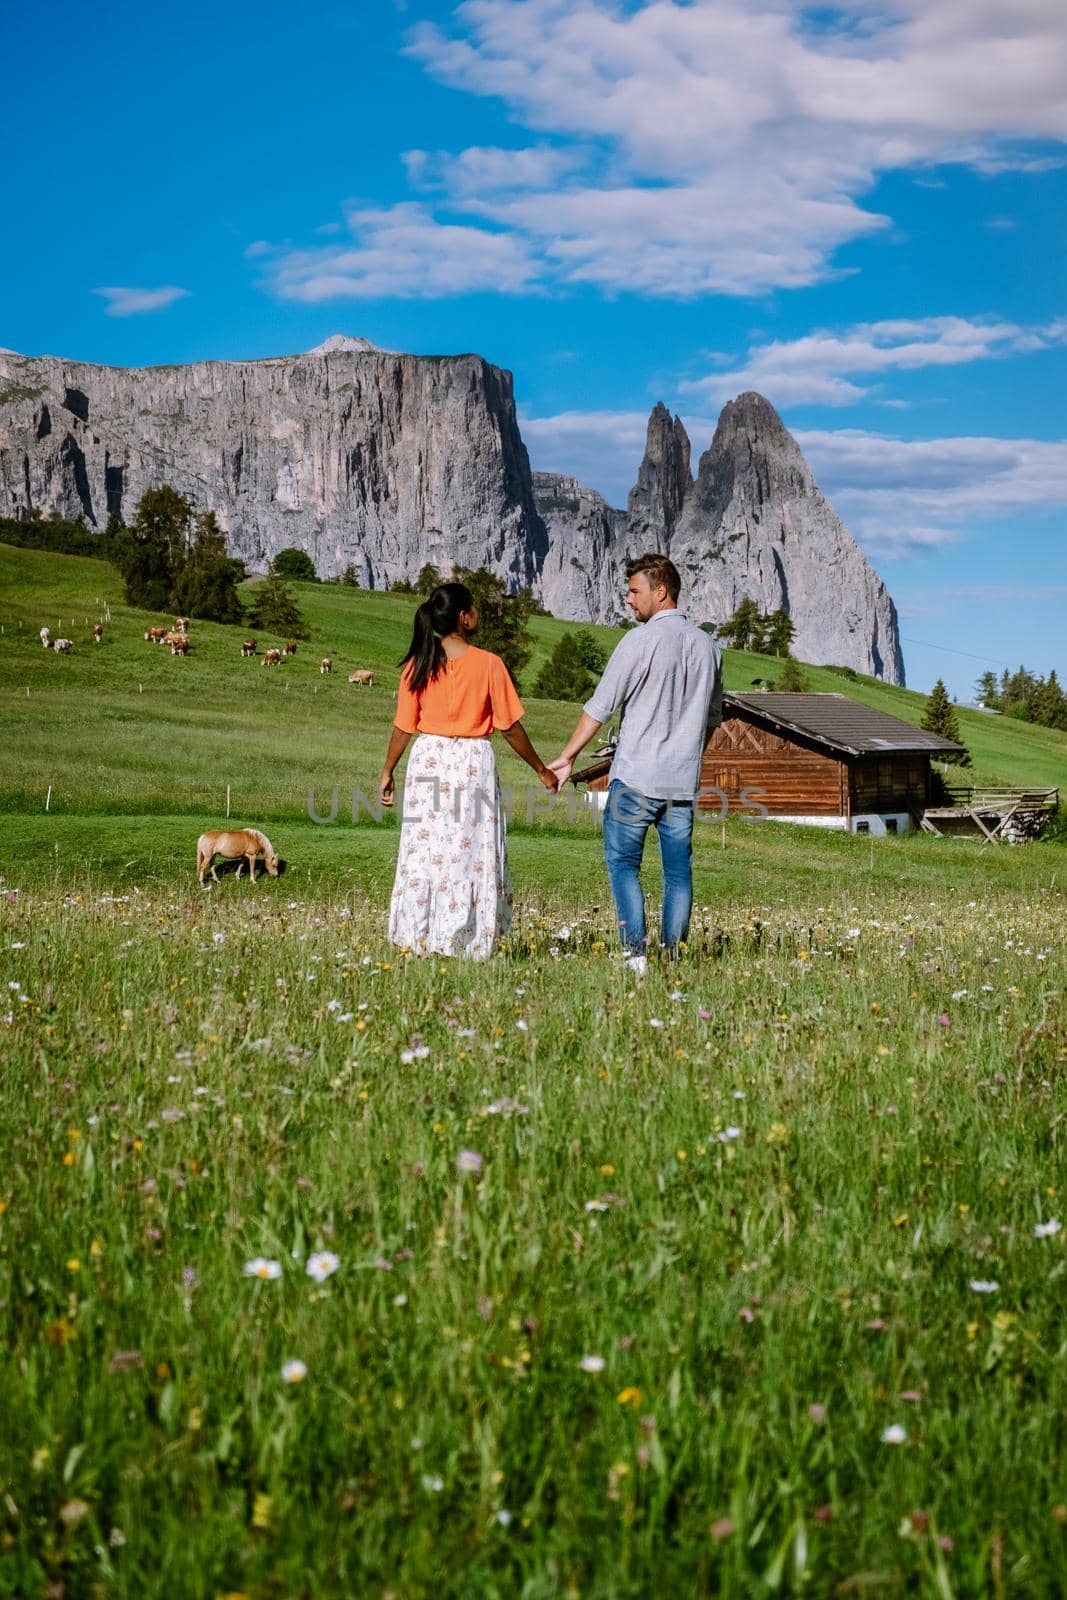 couple men and woman on vacation in the Dolomites Italy, Alpe di Siusi - Seiser Alm Dolomites, Trentino Alto Adige, South Tyrol, Italy. Europe